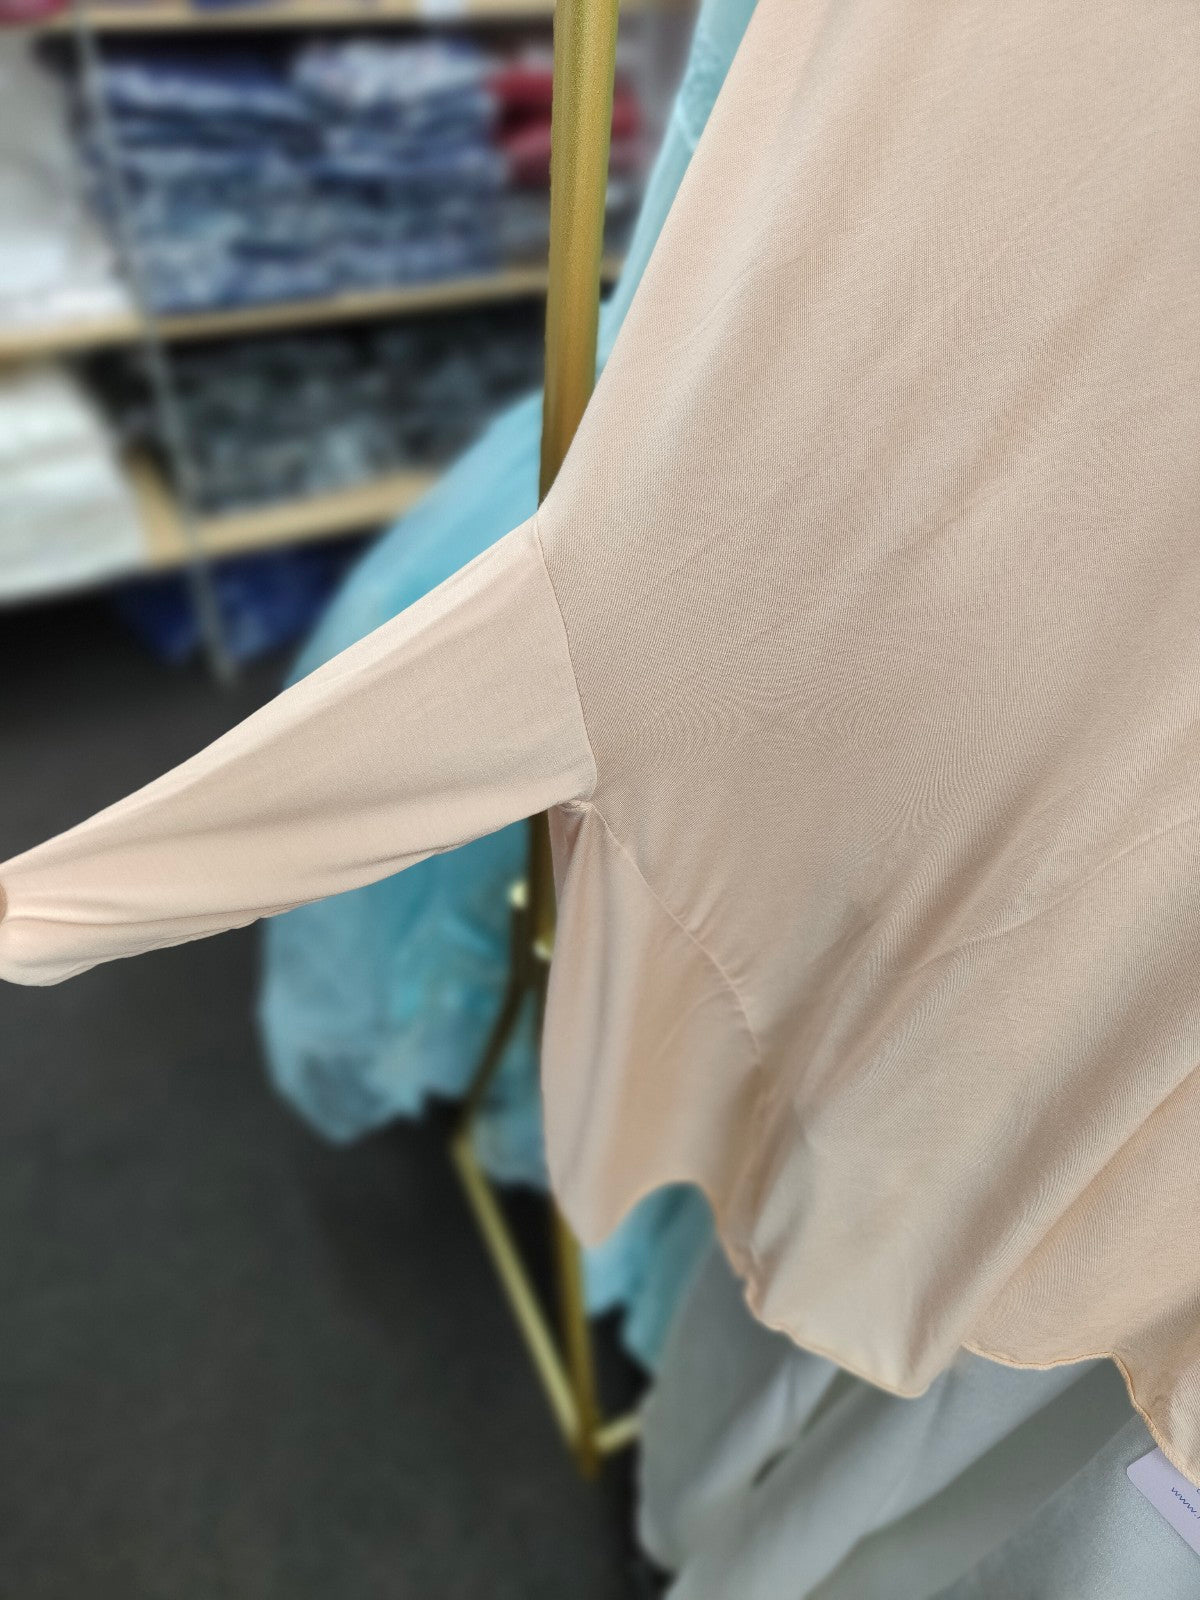 Discover unparalleled comfort with our Champagne Cream Bamboo Jilbab. Lightweight, breathable, and perfect for summer. Perfect for Summer! Lightweight, Breathable, Cool Bamboo Jilbab in Champagne Cream for Hot Weather. Buy the best Bamboo Jilbab online. Ideal for hot weather. Elevate your style at Hikmah Boutique. 